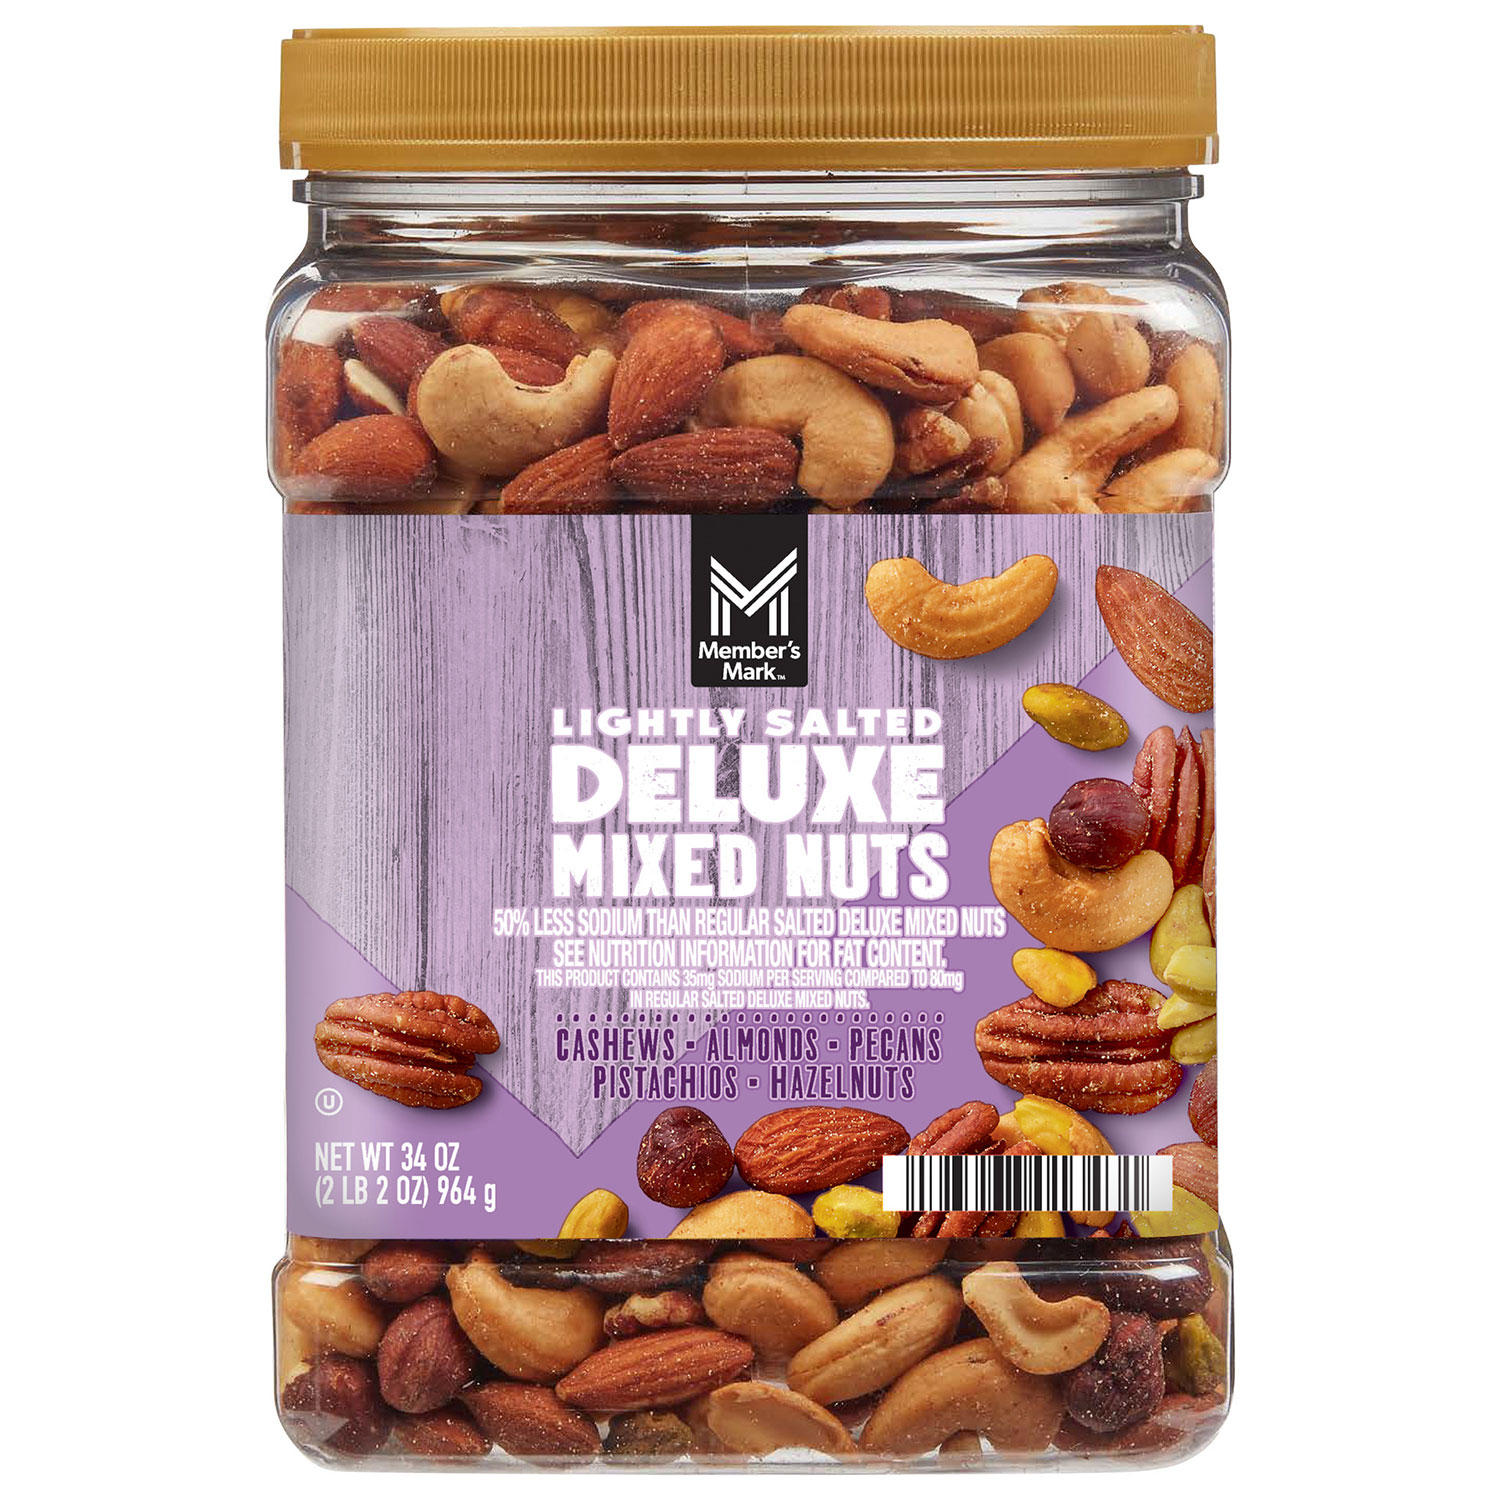 Member's Mark Lightly Salted Deluxe Mixed Nuts 34 oz.